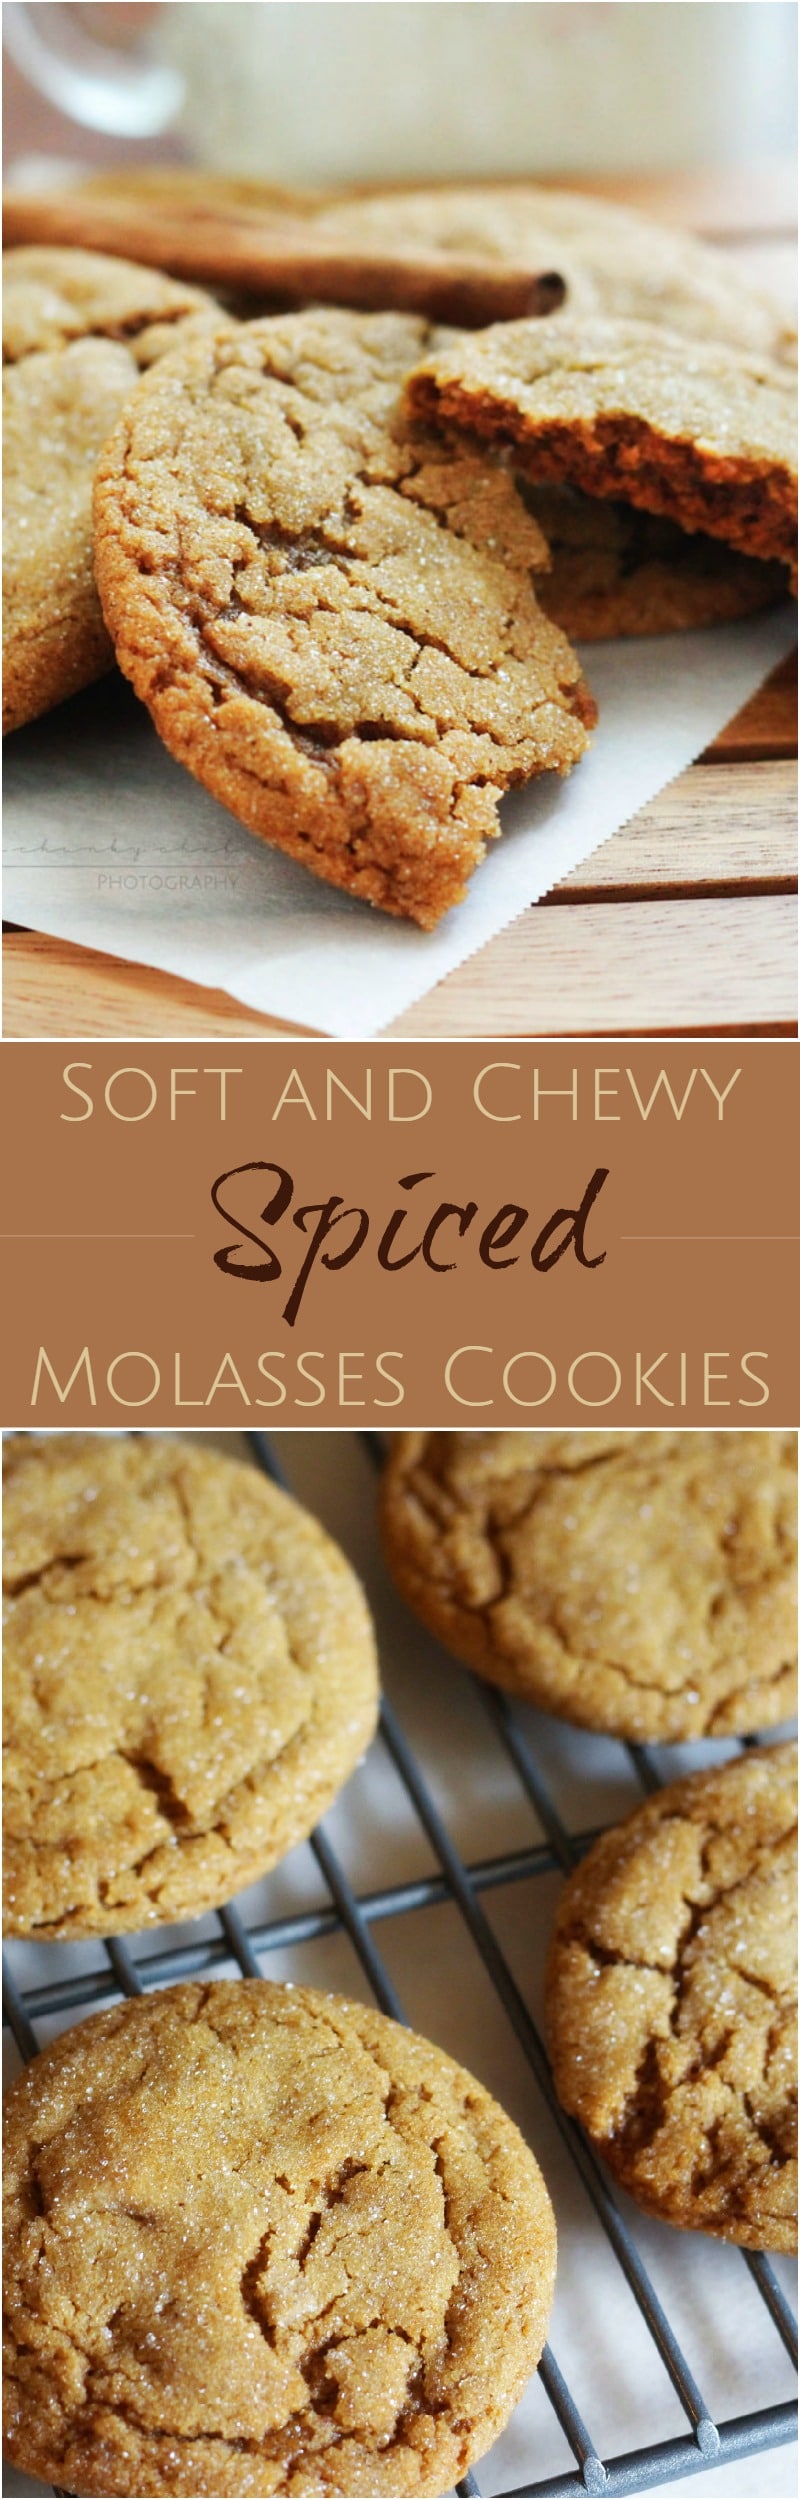 Soft Spiced Molasses Cookies | Soft and perfectly spiced, these cookies will soon become one of your favorite! These cookies are soft and chewy, with that classic dark molasses flavor!